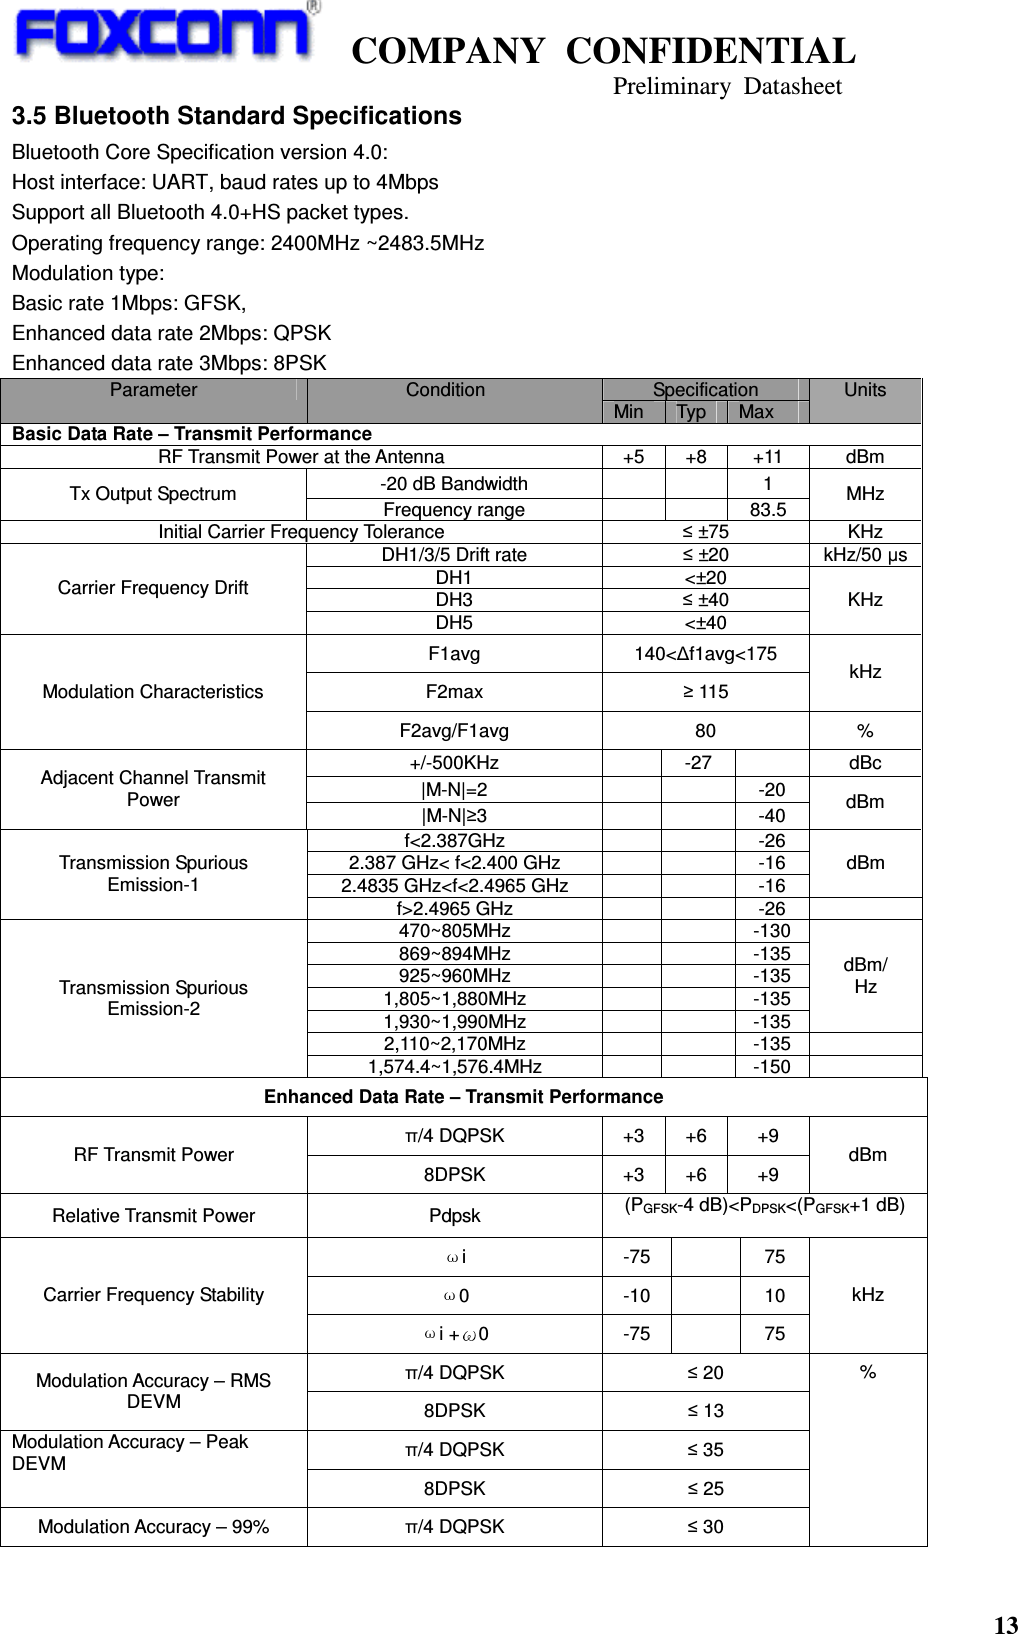    COMPANY  CONFIDENTIAL                                                                     Preliminary  Datasheet 13  3.5 Bluetooth Standard Specifications Bluetooth Core Specification version 4.0: Host interface: UART, baud rates up to 4Mbps Support all Bluetooth 4.0+HS packet types. Operating frequency range: 2400MHz ~2483.5MHz Modulation type:   Basic rate 1Mbps: GFSK, Enhanced data rate 2Mbps: QPSK Enhanced data rate 3Mbps: 8PSK Specification Parameter  Condition Min  Typ  Max Units Basic Data Rate – Transmit Performance RF Transmit Power at the Antenna  +5  +8  +11  dBm -20 dB Bandwidth    1 Tx Output Spectrum  Frequency range      83.5  MHz Initial Carrier Frequency Tolerance  ≤ ±75  KHz DH1/3/5 Drift rate  ≤ ±20  kHz/50 µs DH1  &lt;±20 DH3  ≤ ±40 Carrier Frequency Drift DH5  &lt;±40 KHz F1avg  140&lt;∆f1avg&lt;175 F2max  ≥ 115 kHz Modulation Characteristics F2avg/F1avg  80  % +/-500KHz    -27    dBc |M-N|=2      -20 Adjacent Channel Transmit Power  |M-N|≥3      -40  dBm f&lt;2.387GHz      -26 2.387 GHz&lt; f&lt;2.400 GHz      -16 2.4835 GHz&lt;f&lt;2.4965 GHz      -16 dBm Transmission Spurious Emission-1 f&gt;2.4965 GHz      -26   470~805MHz      -130 869~894MHz      -135 925~960MHz      -135 1,805~1,880MHz      -135 1,930~1,990MHz      -135 dBm/ Hz 2,110~2,170MHz      -135  Transmission Spurious Emission-2 1,574.4~1,576.4MHz      -150  Enhanced Data Rate – Transmit Performance π/4 DQPSK  +3  +6  +9 RF Transmit Power 8DPSK  +3  +6  +9 dBm Relative Transmit Power  Pdpsk  (PGFSK-4 dB)&lt;PDPSK&lt;(PGFSK+1 dB)  i  -75    75 0  -10    10 Carrier Frequency Stability i + 0  -75    75 kHz π/4 DQPSK  ≤ 20 Modulation Accuracy – RMS DEVM  8DPSK  ≤ 13 π/4 DQPSK  ≤ 35 Modulation Accuracy – Peak DEVM 8DPSK  ≤ 25 Modulation Accuracy – 99%  π/4 DQPSK  ≤ 30 % 